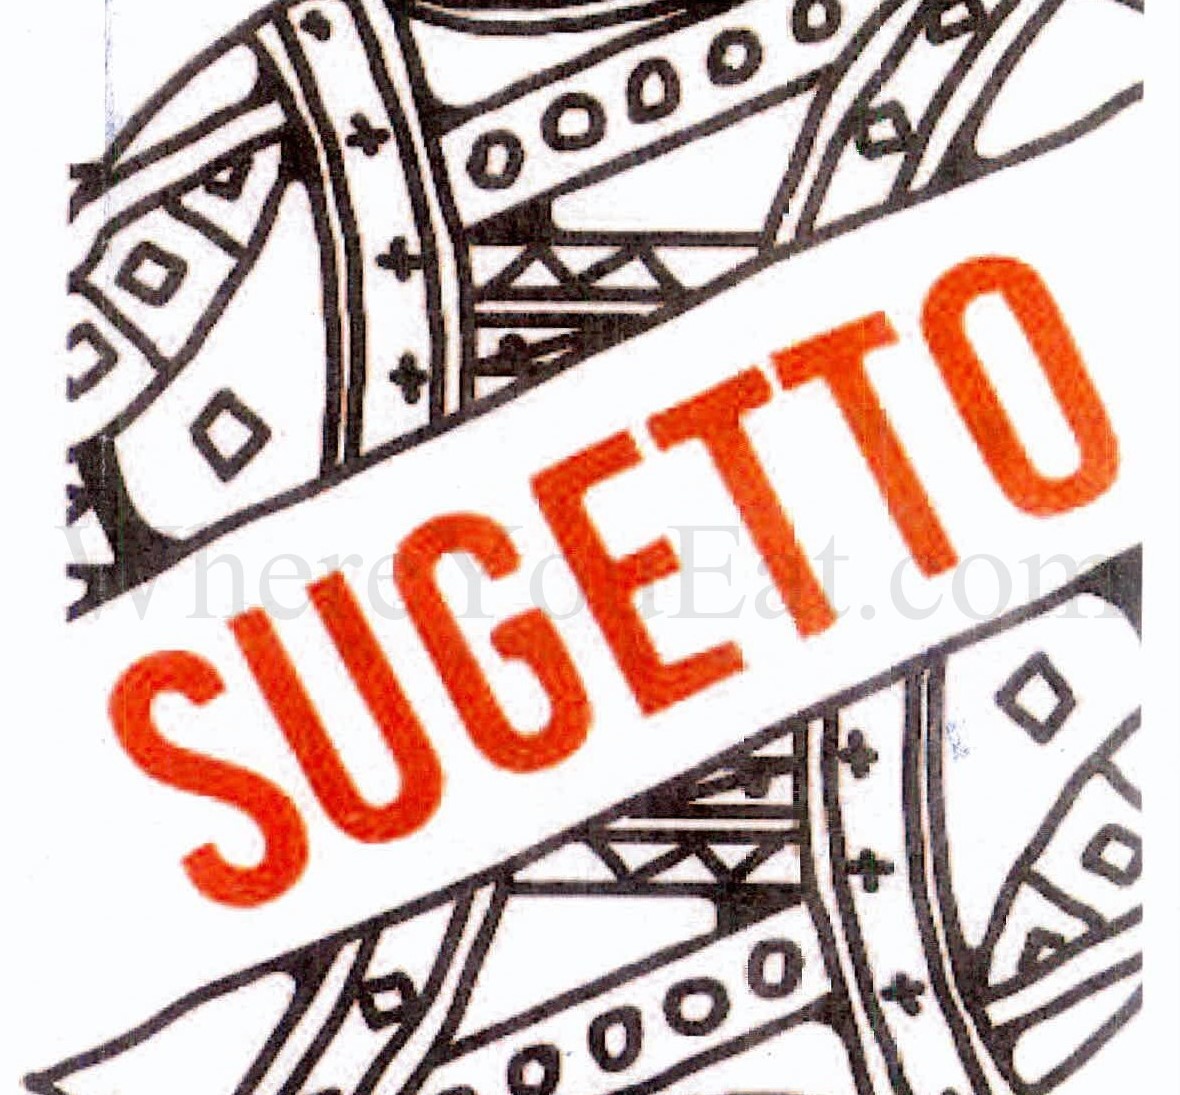 SUGETTO JOES